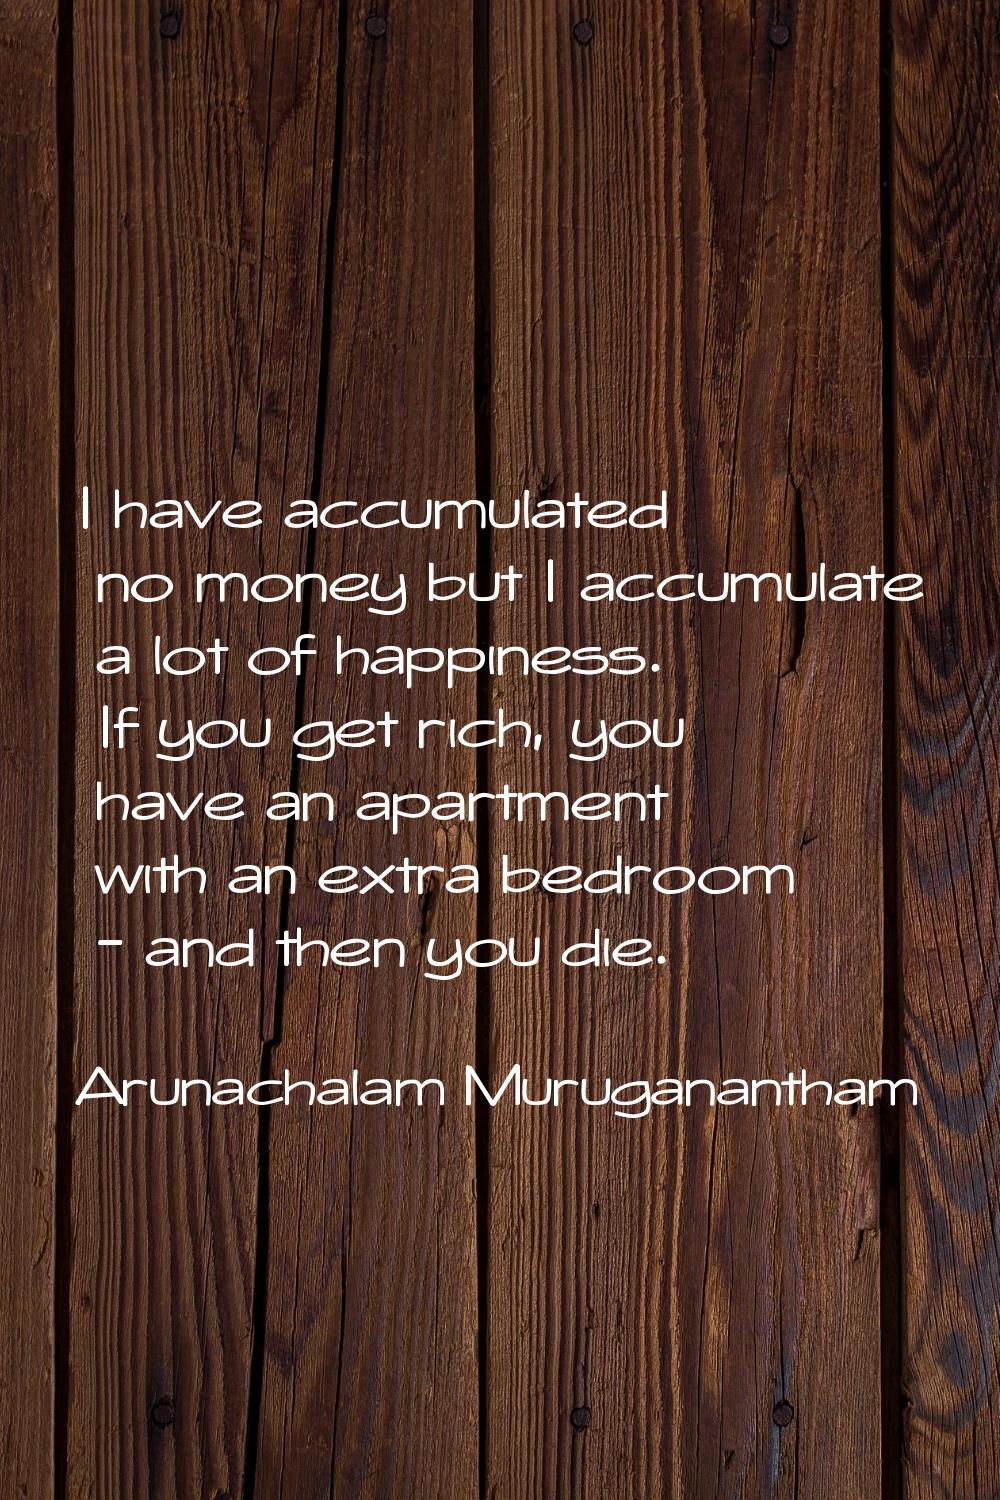 I have accumulated no money but I accumulate a lot of happiness. If you get rich, you have an apart